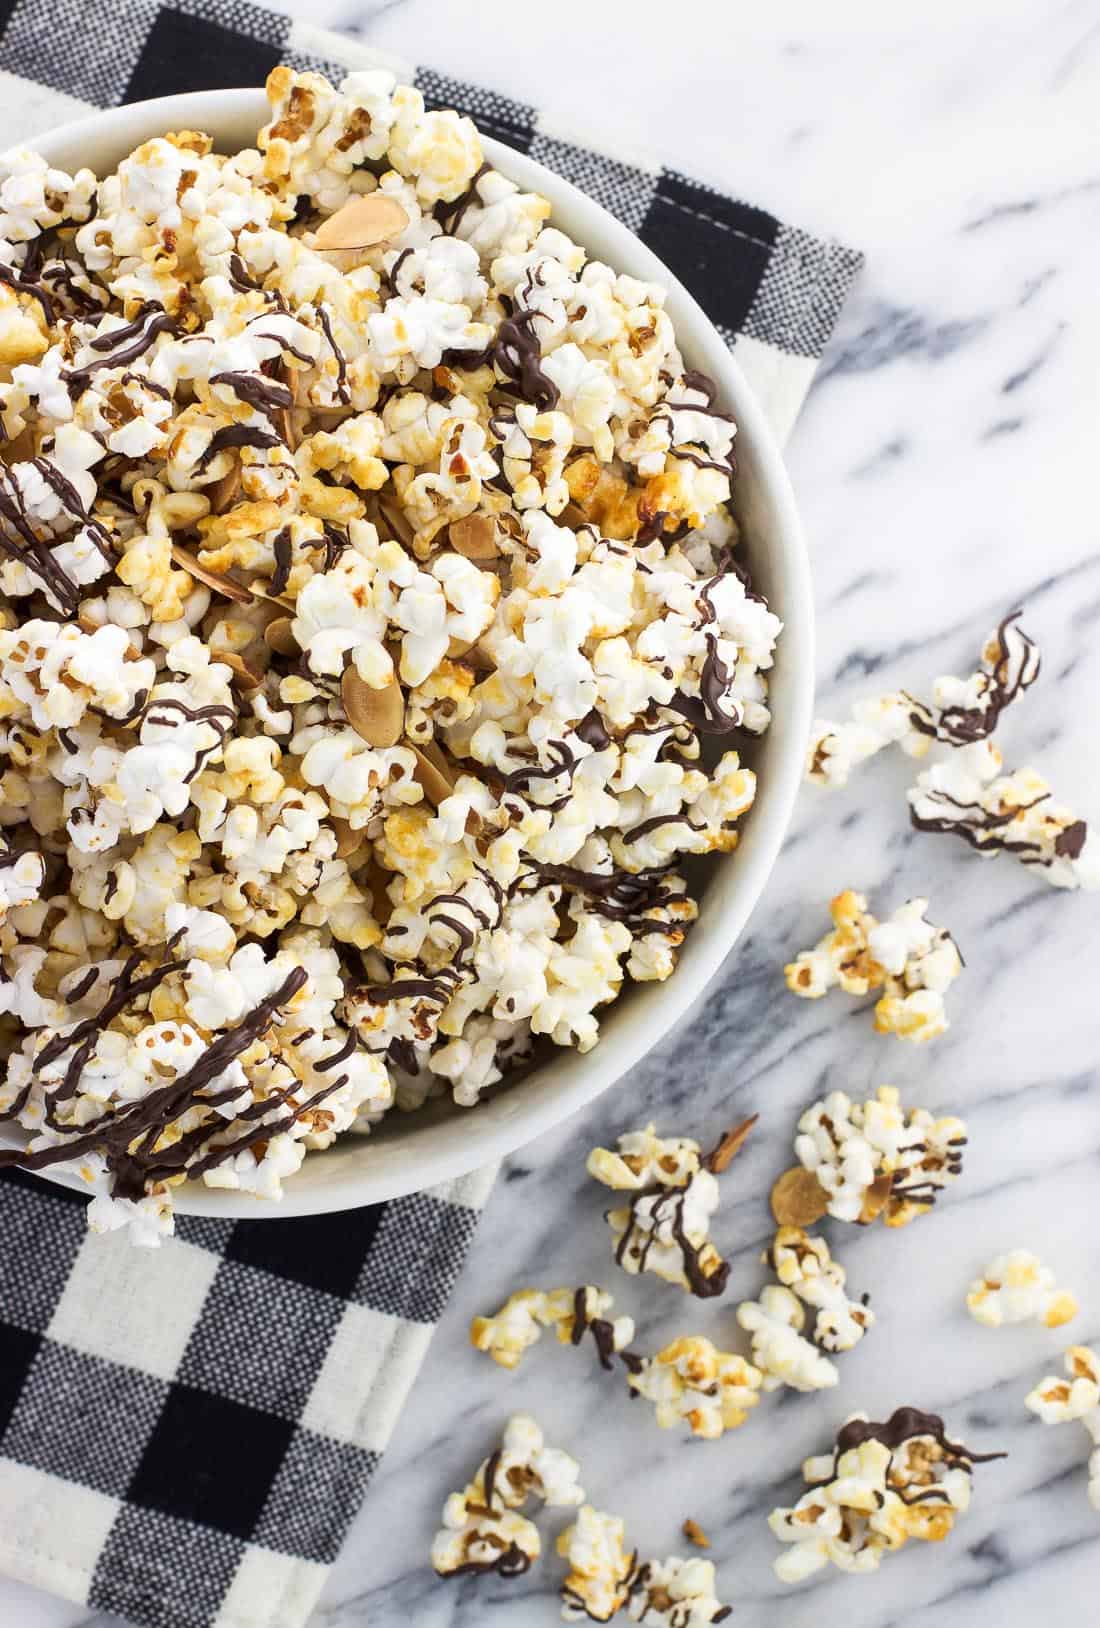 A bowl of chocolate kettle corn on a marble board with some loose kernels and clusters next to it